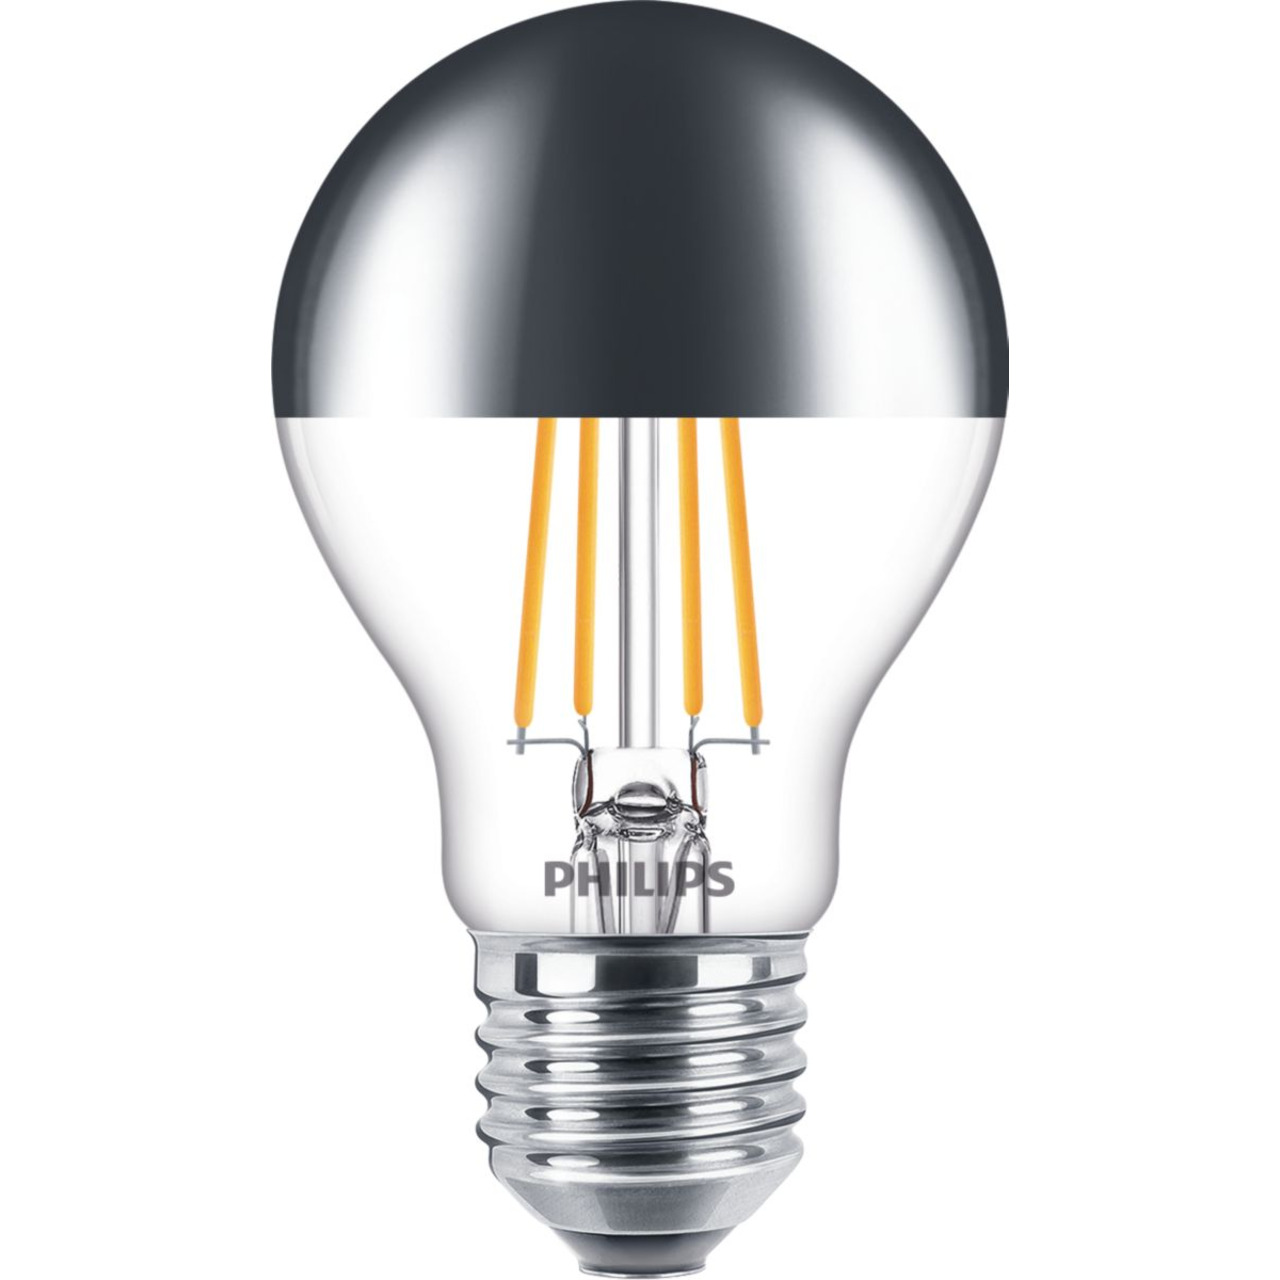 Philips 7-2-W-LED-Spiegelkopflampe MASTER Value GLASS- E27- warmweiss- dimmbar